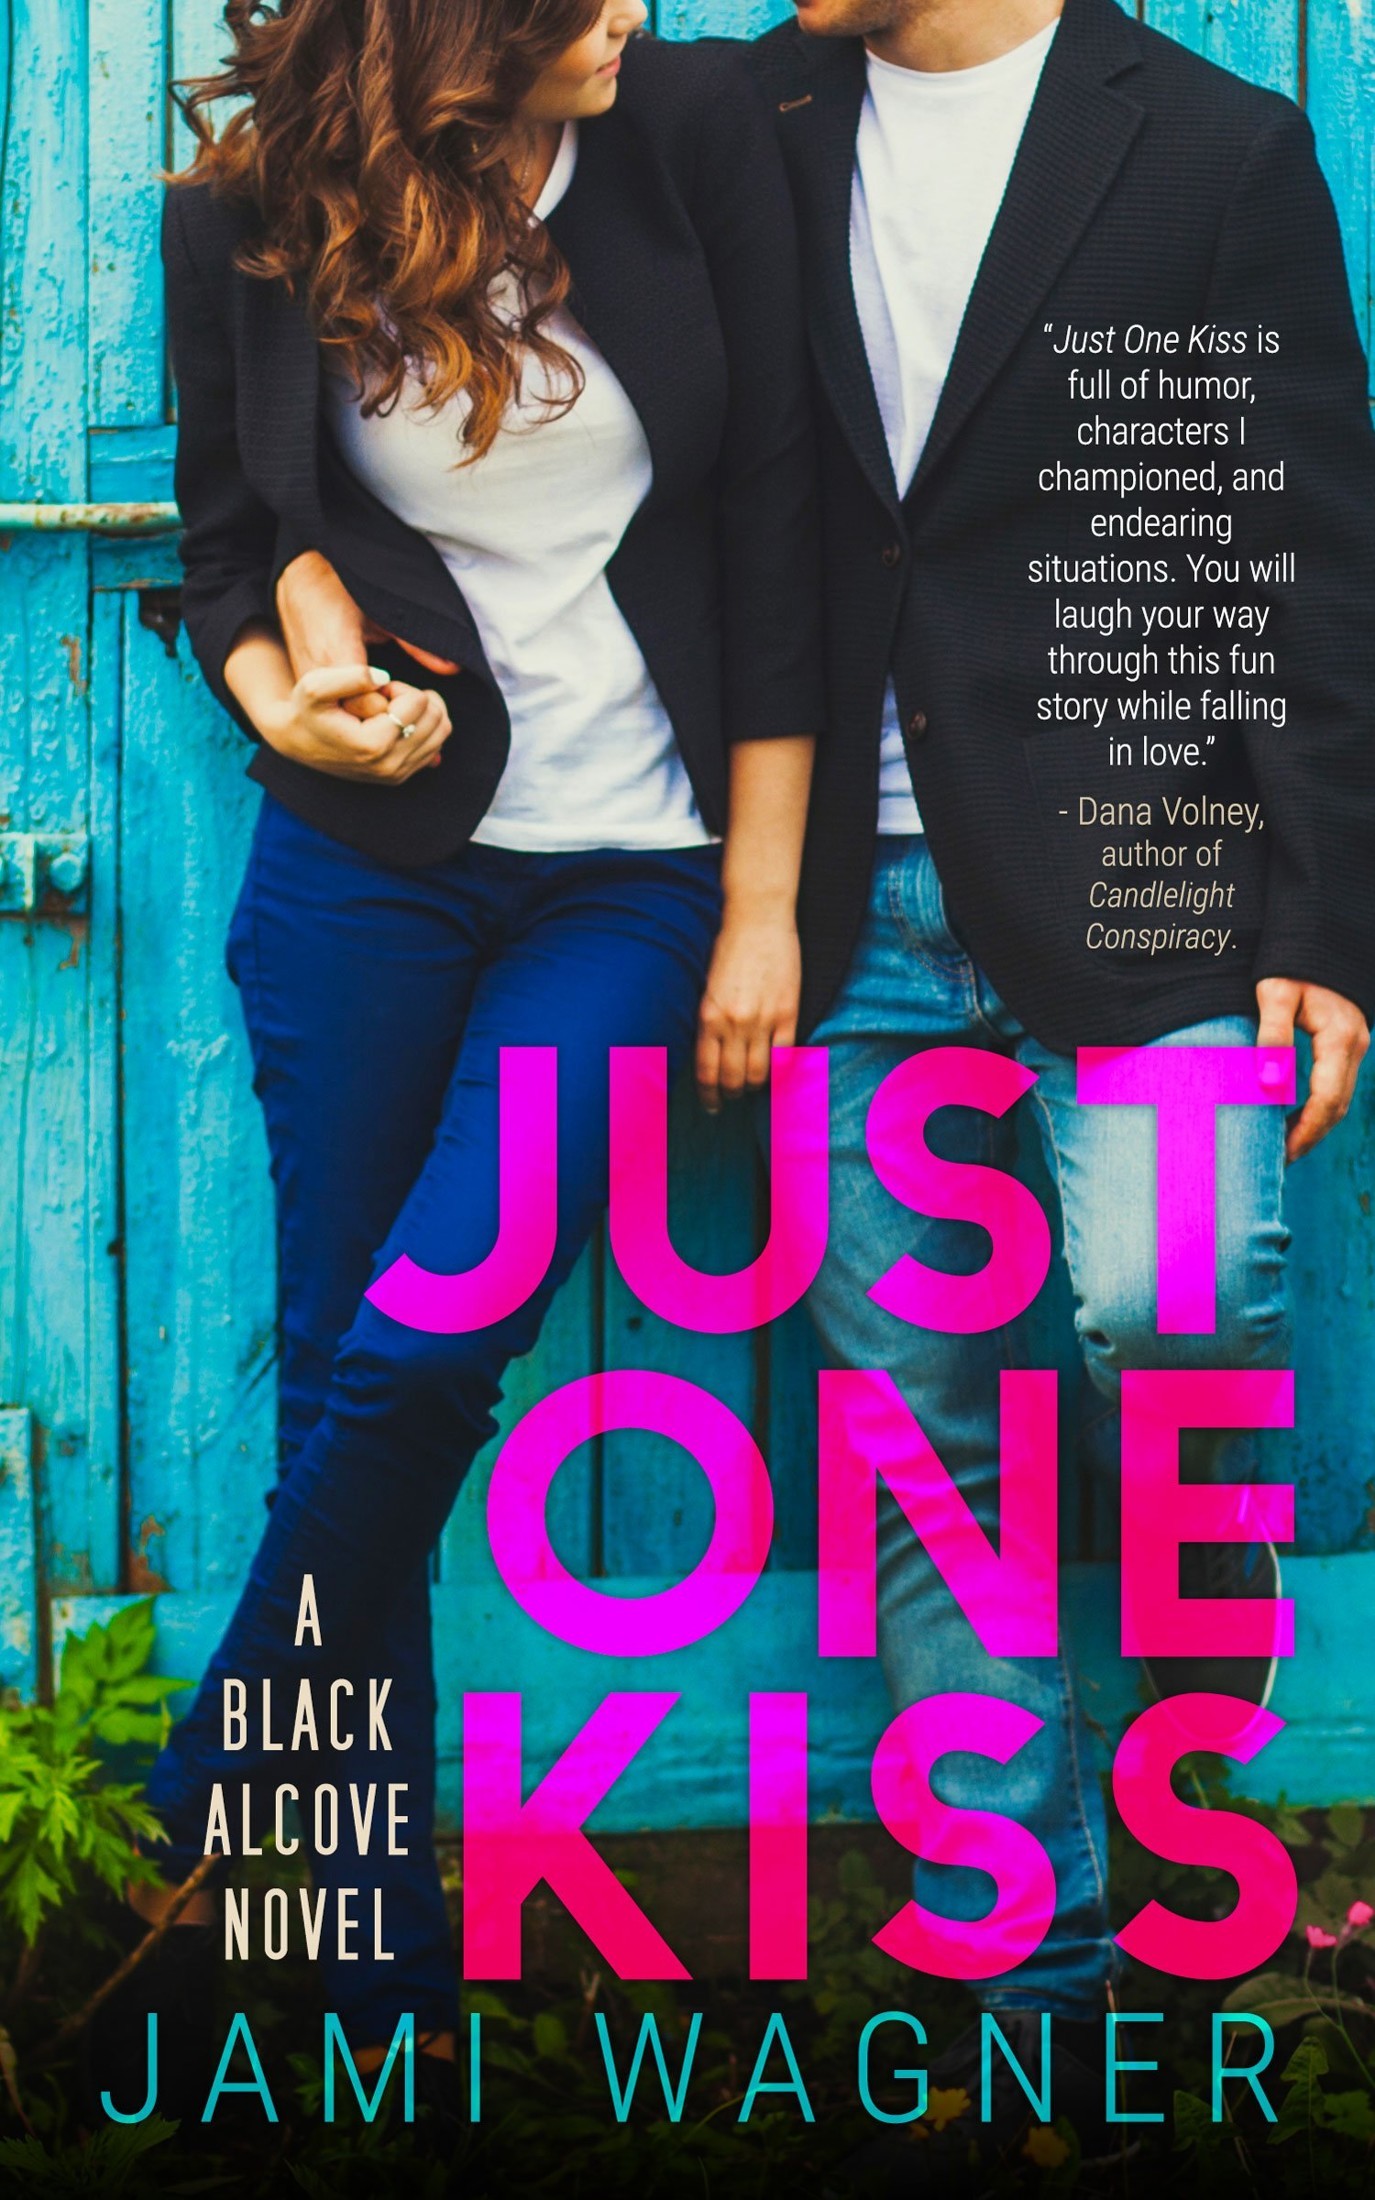 Just One Kiss: A Black Alcove Novel (The Black Alcove Series Book 1) by Jami Wagner